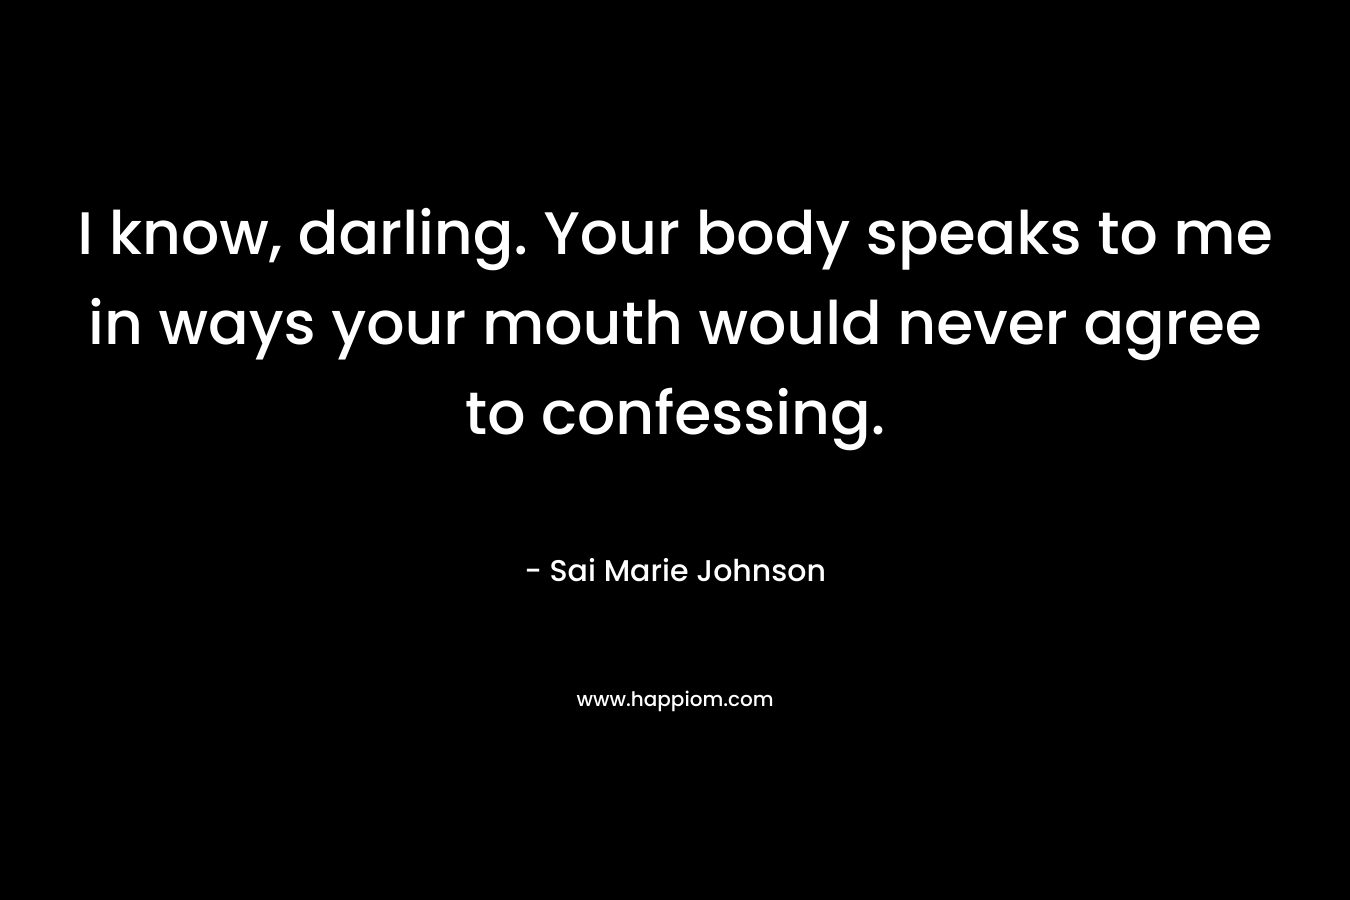 I know, darling. Your body speaks to me in ways your mouth would never agree to confessing. – Sai Marie Johnson